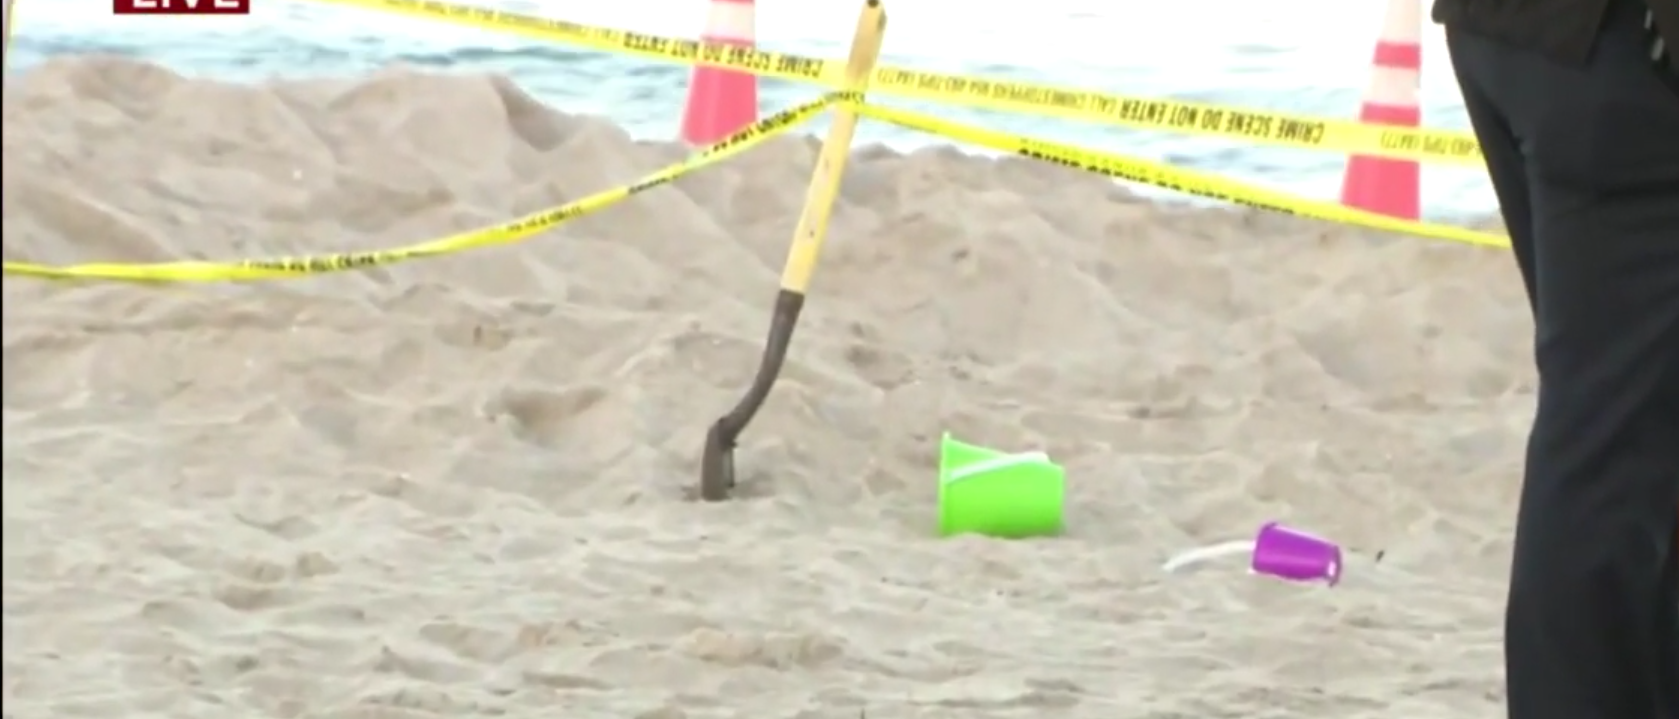 ‘Unfathomable Accident’: Girl Dies After Digging Hole In Florida Beach Sand